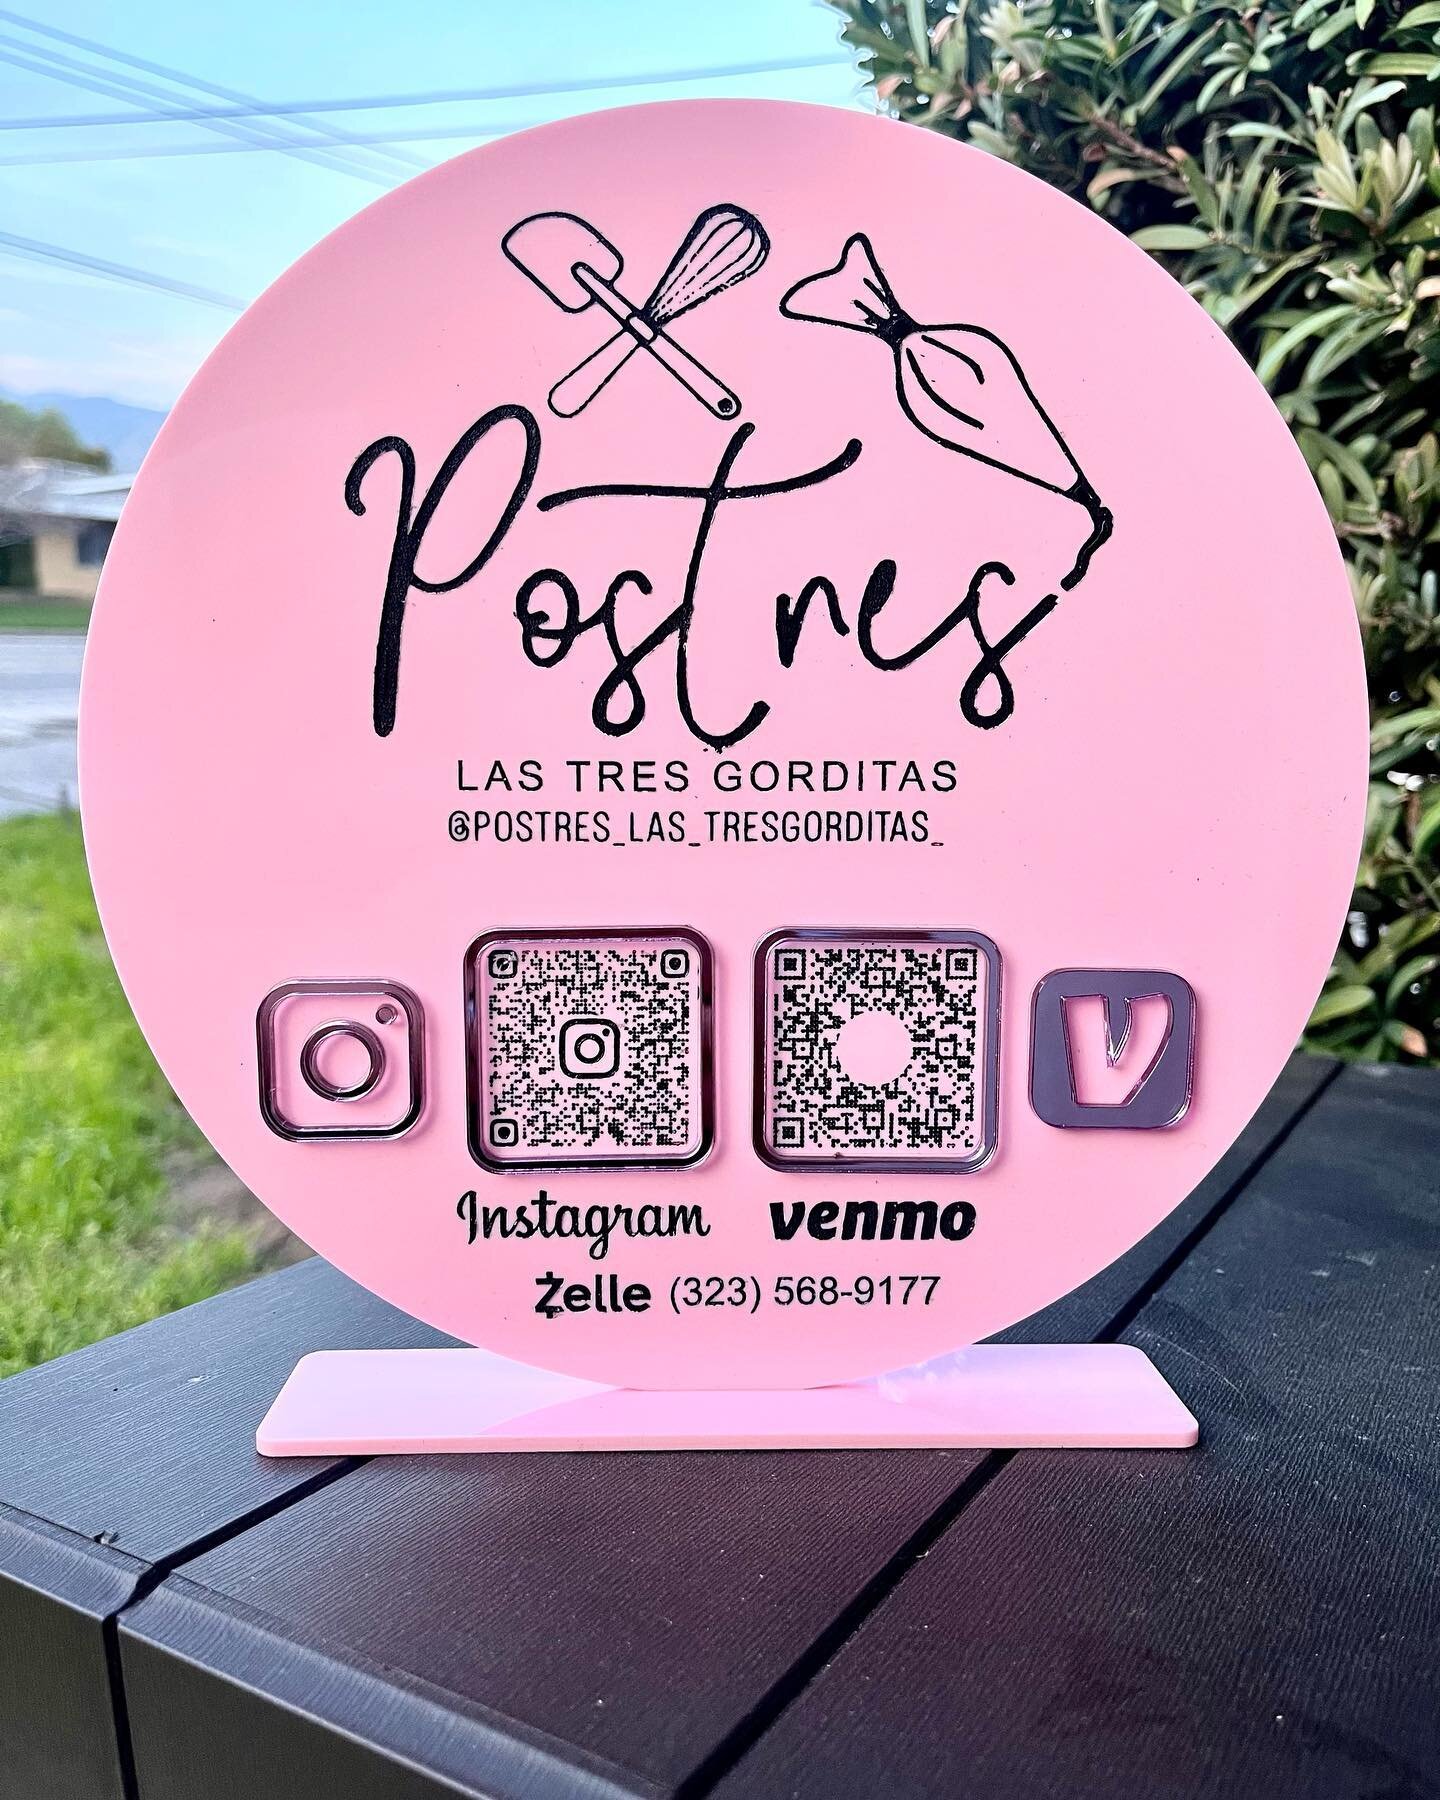 How cute is the sign we made for @postres_las_tresgorditas_ 💖 Thank you for trusting us with your sign 💕🧁#customqrcode #qrcodesigns #customorder #creations801 #smallbusiness #customcreations #supportlocalbusiness #supporthandcrafted